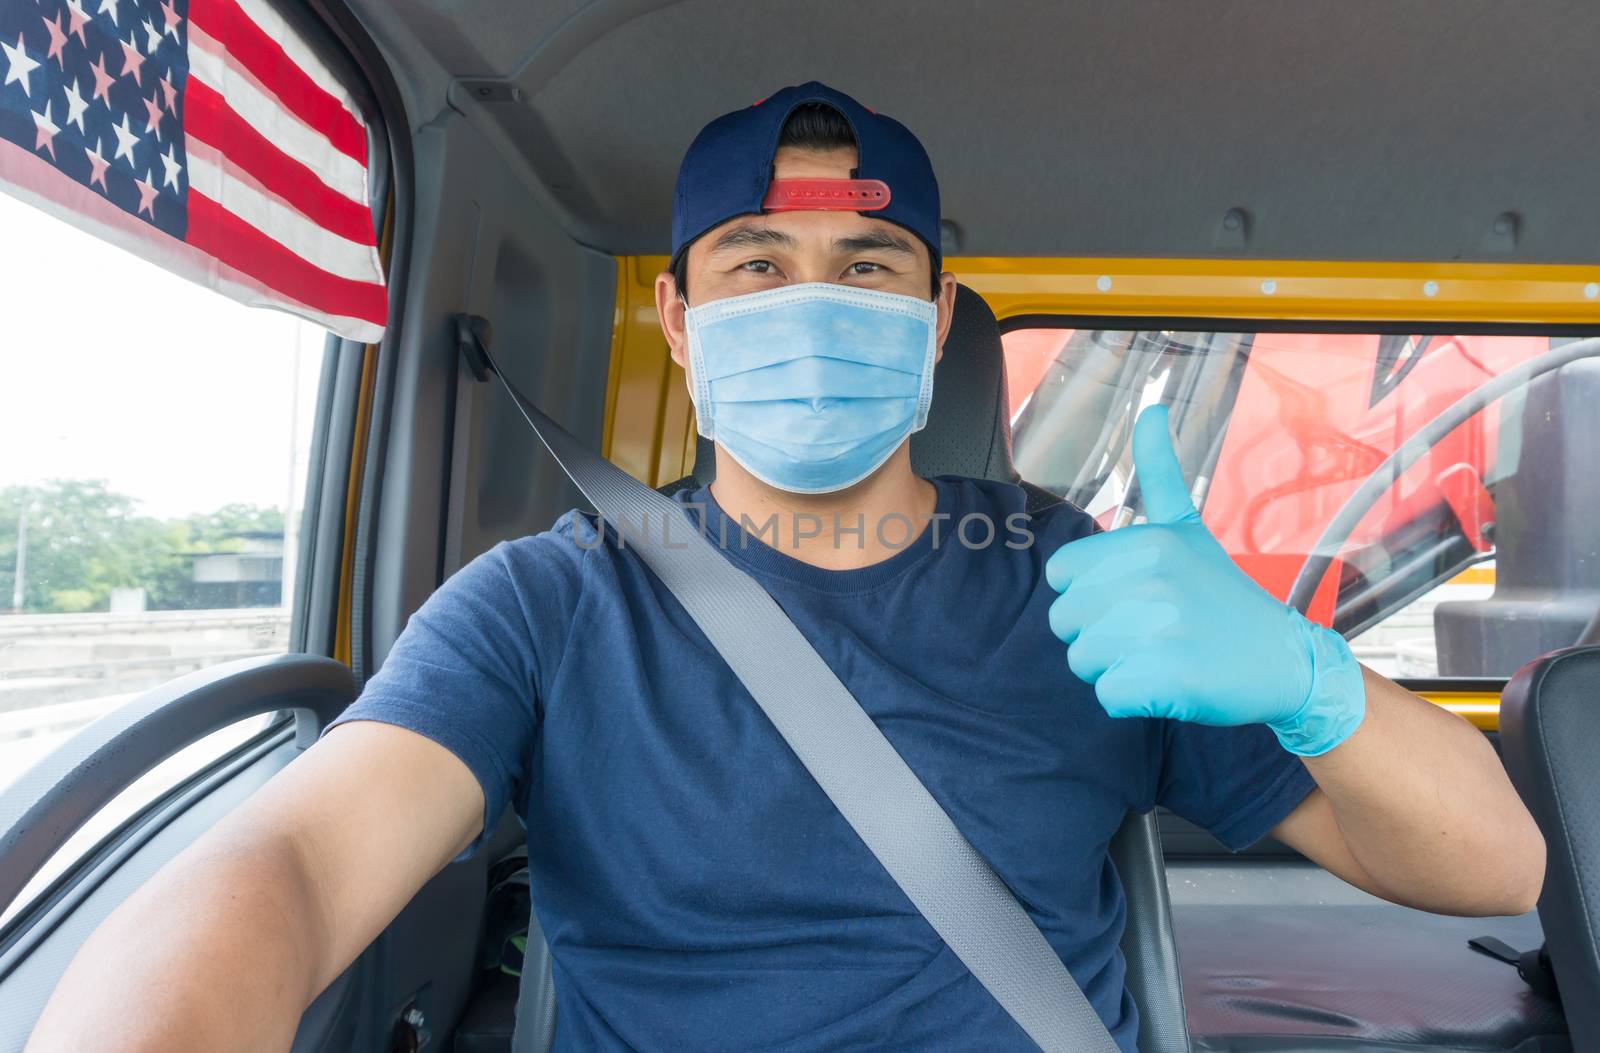 Truck driver wearing a mask by nuad338